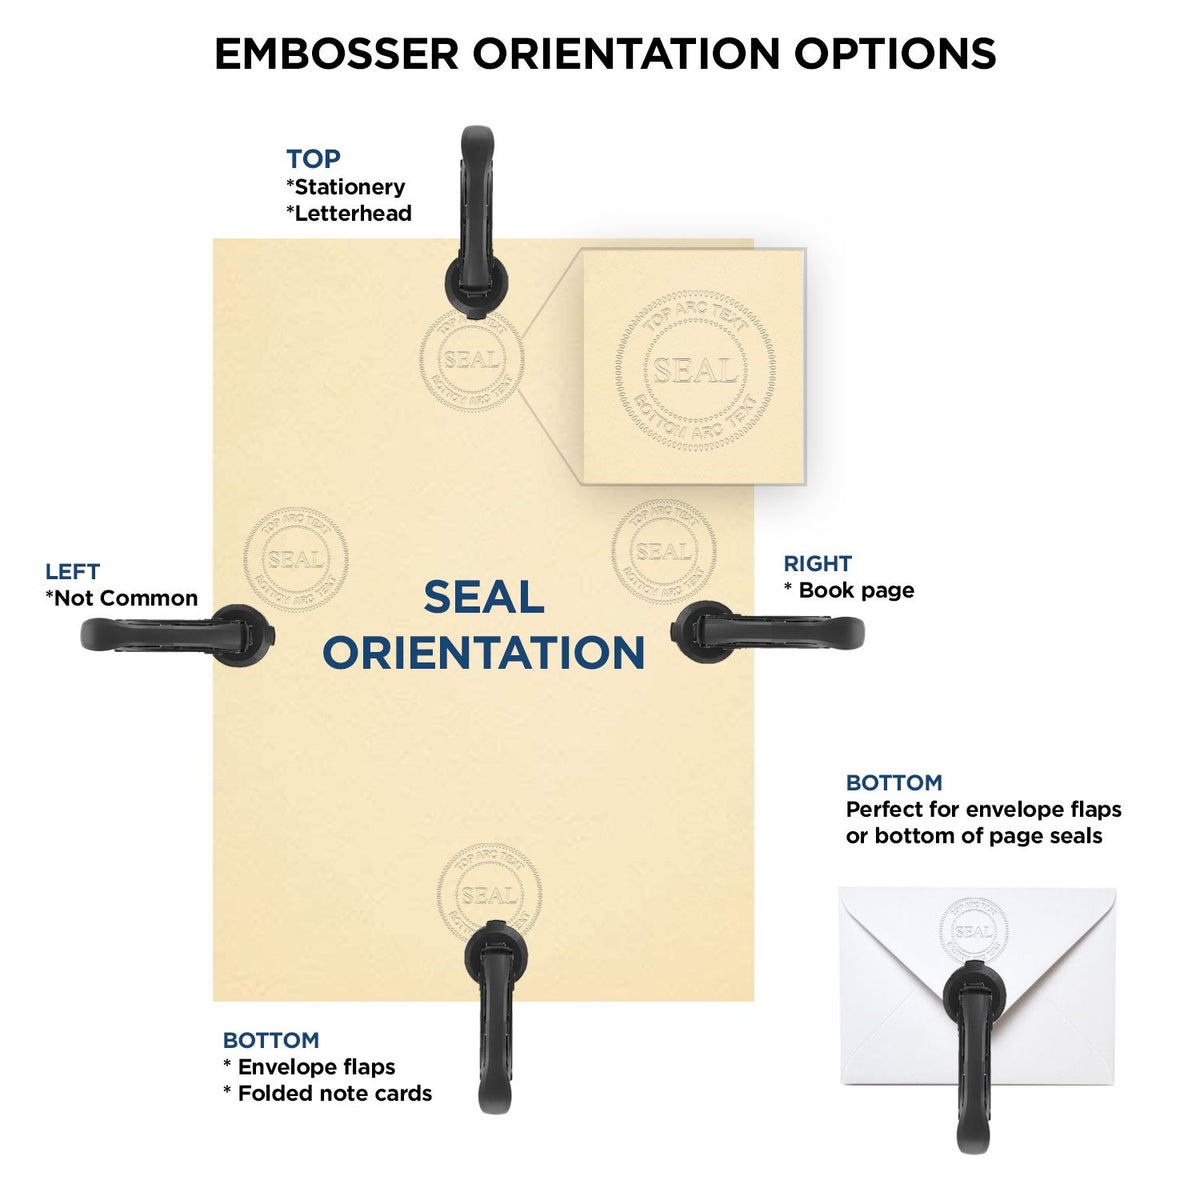 An infographic for the Handheld Colorado Professional Geologist Embosser showing embosser orientation, this is showing examples of a top, bottom, right and left insert.